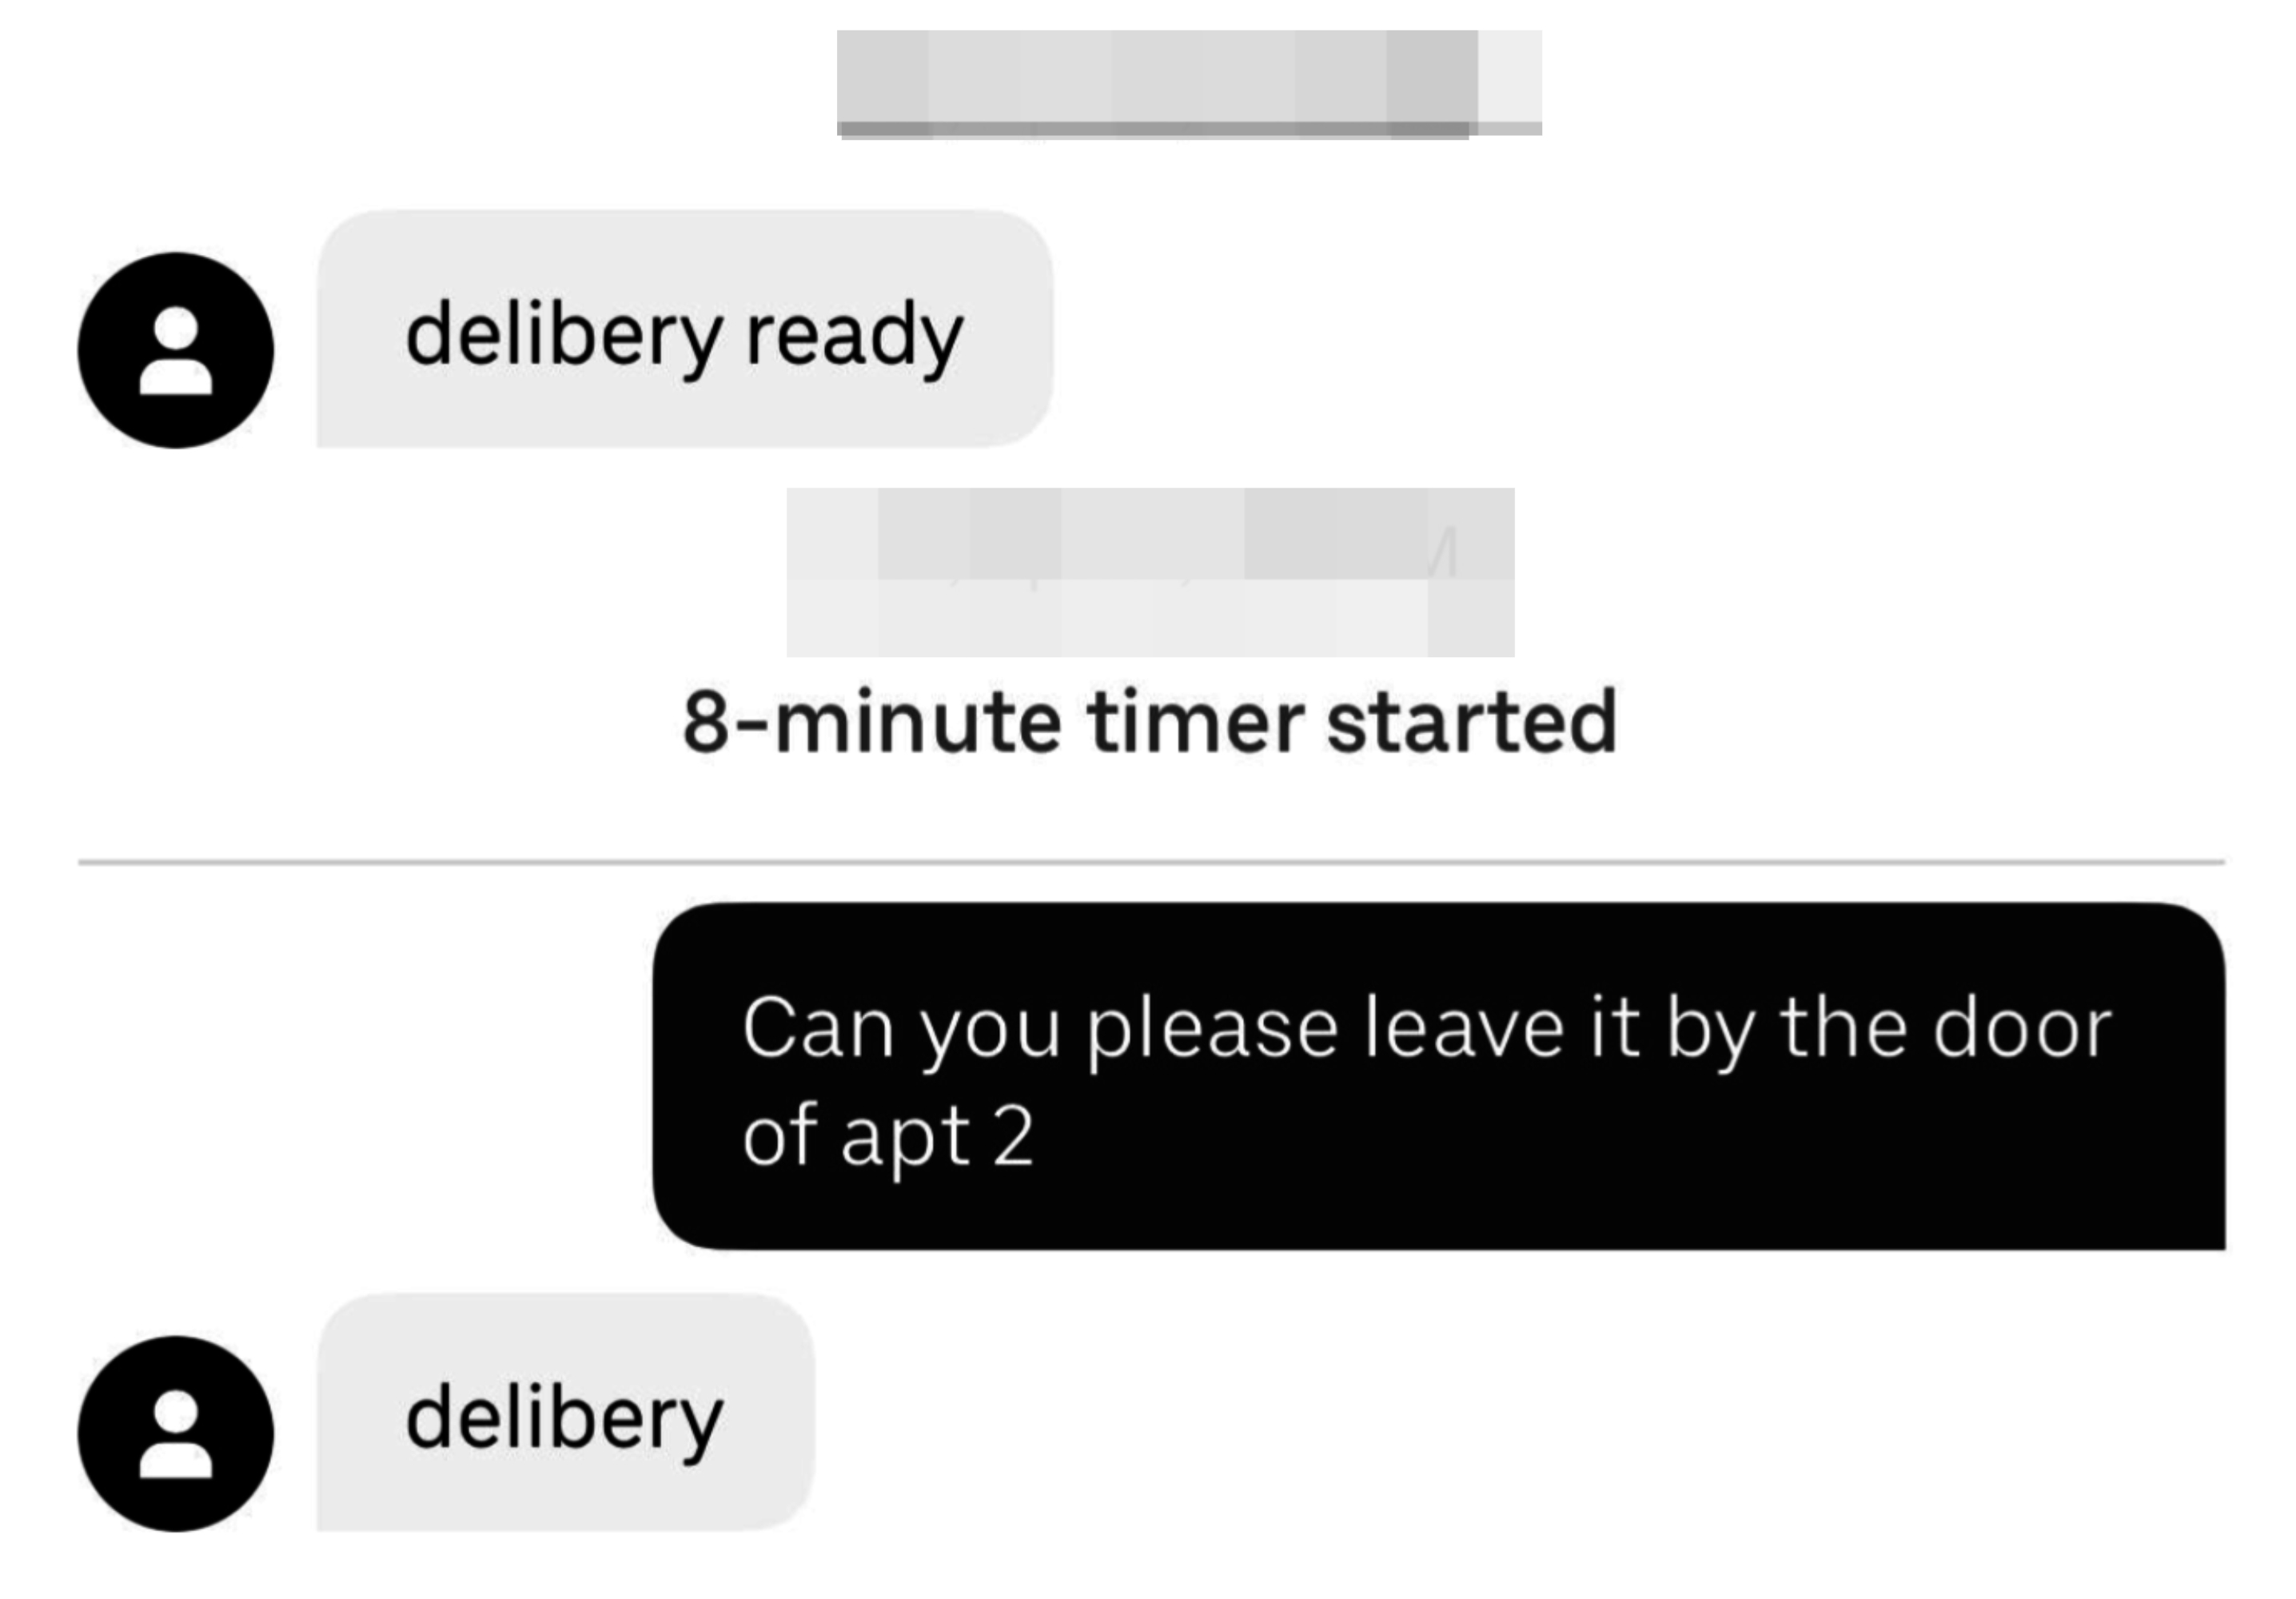 &quot;delibery ready&quot; &quot;8-minute timer started&quot; &quot;Can you please leave it by the door of apt2&quot; &quot;delibery&quot;